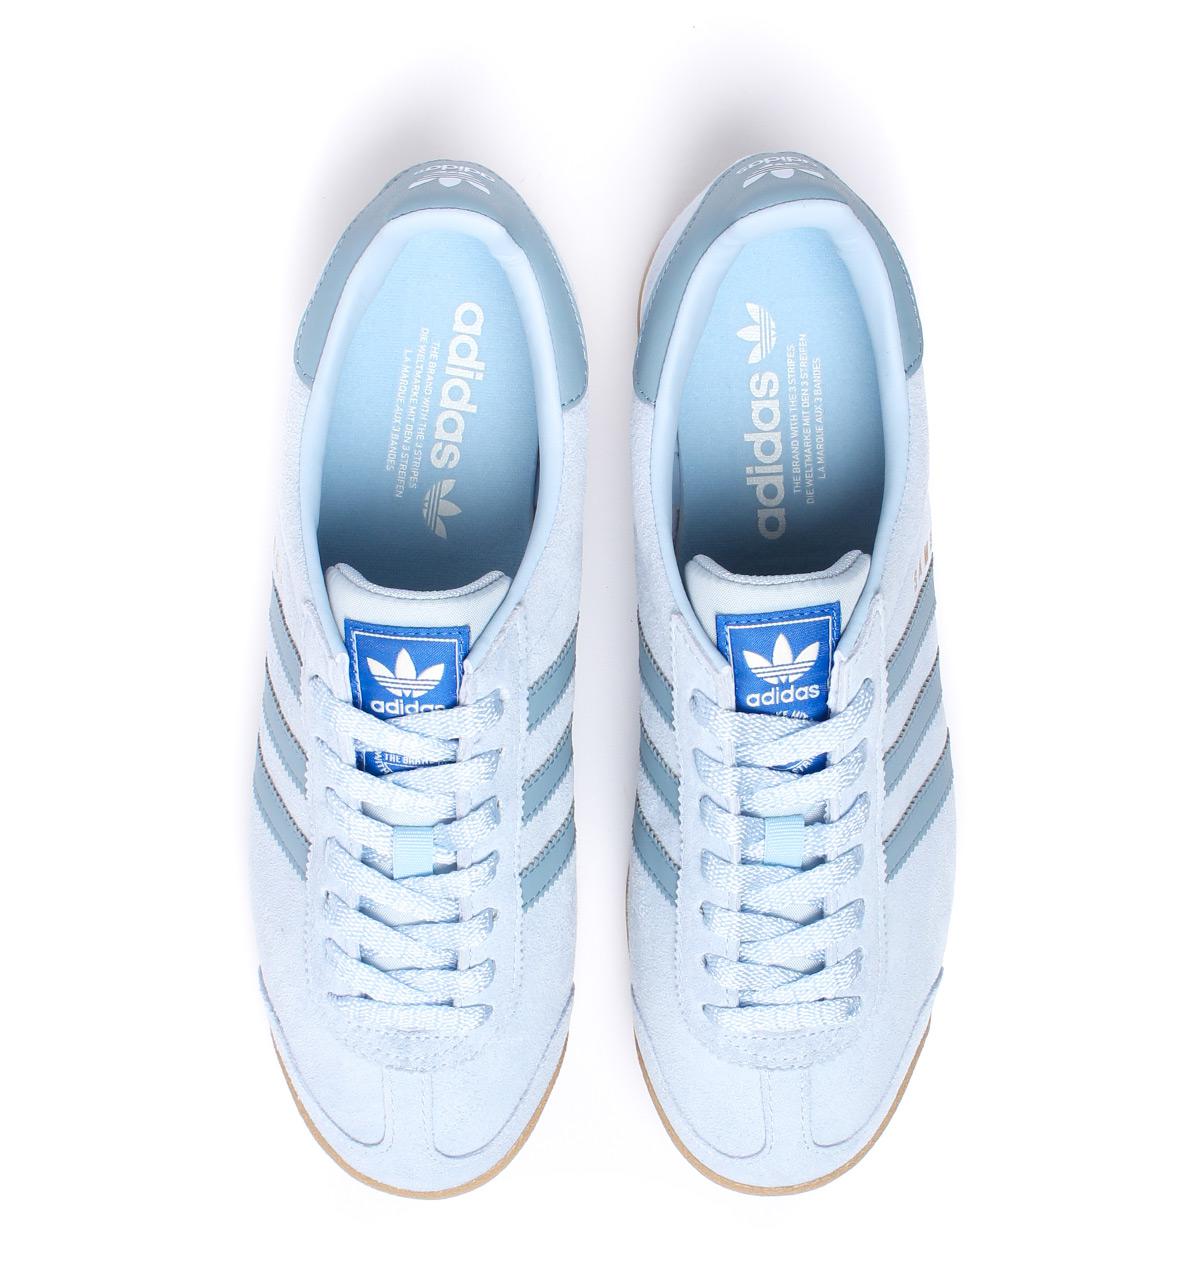 adidas light blue suede trainers